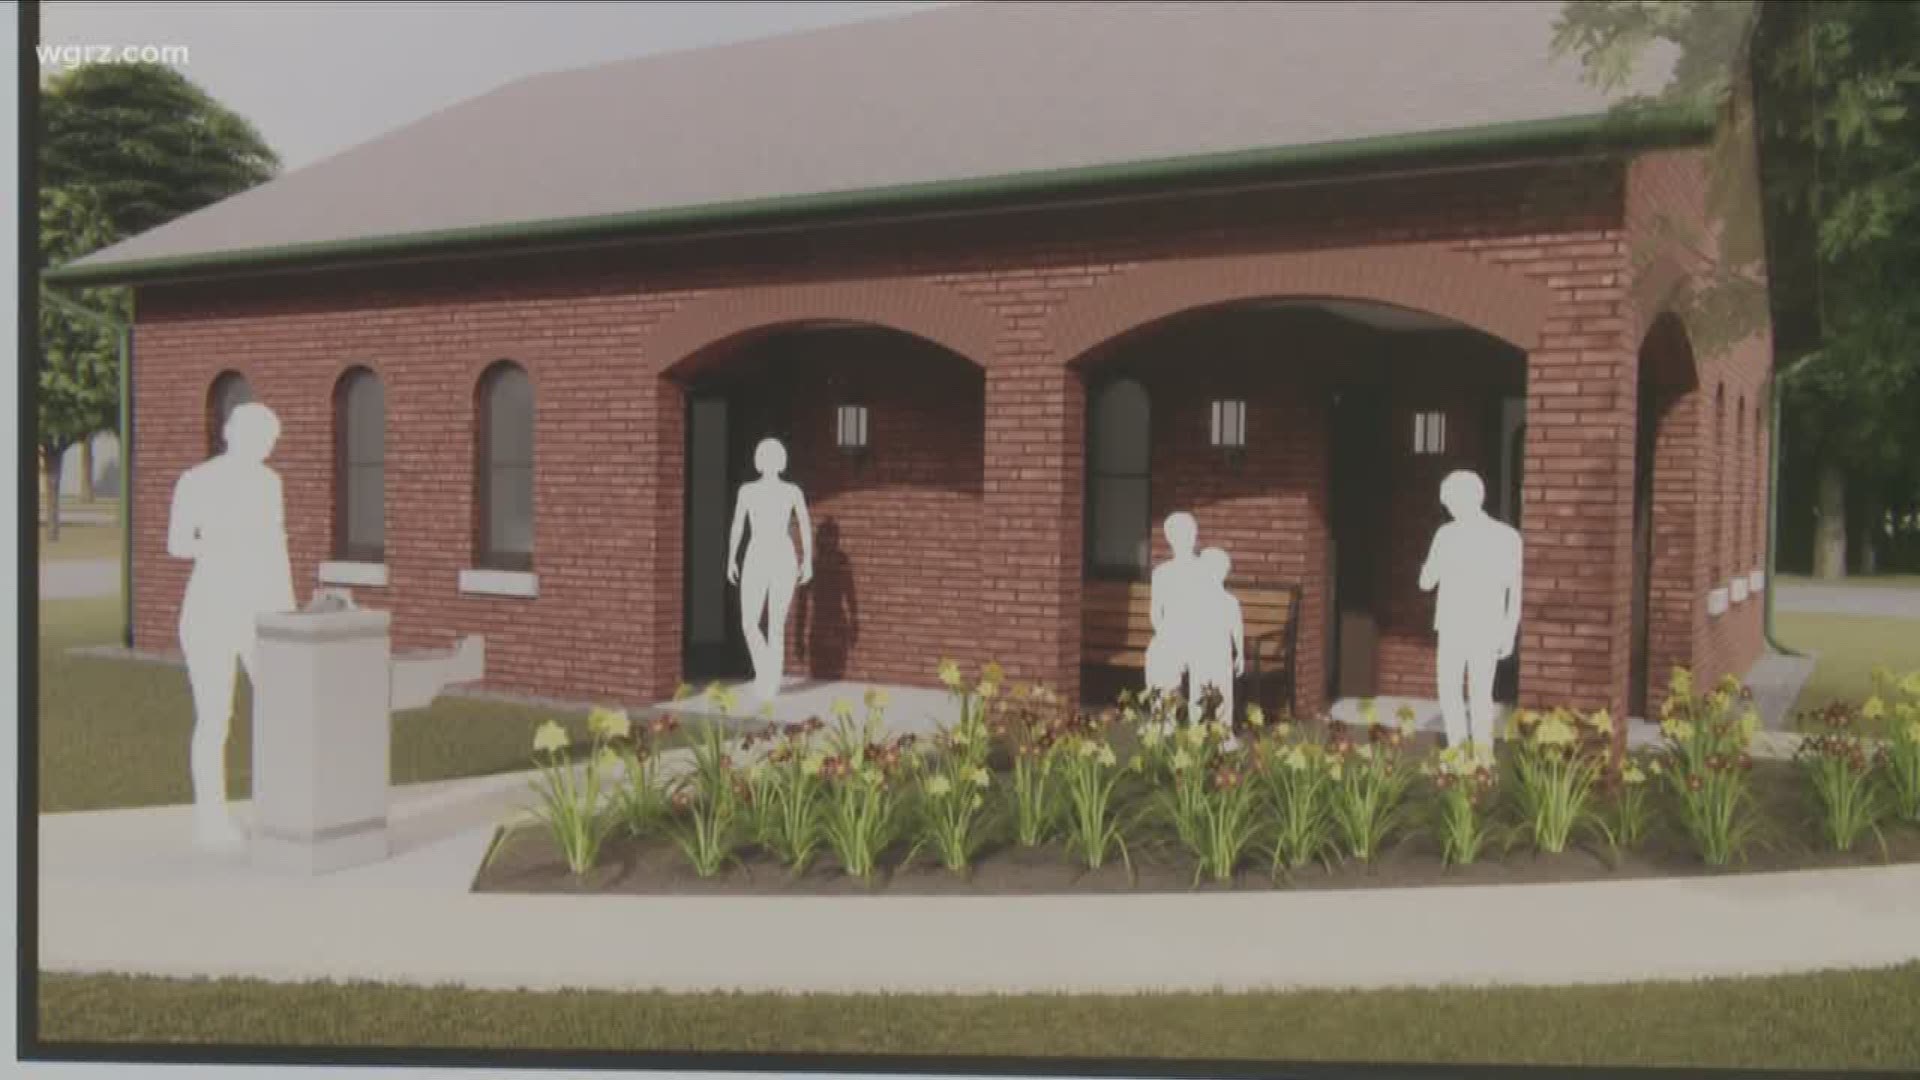 bathroom and station will be designed to look like the carriage barn